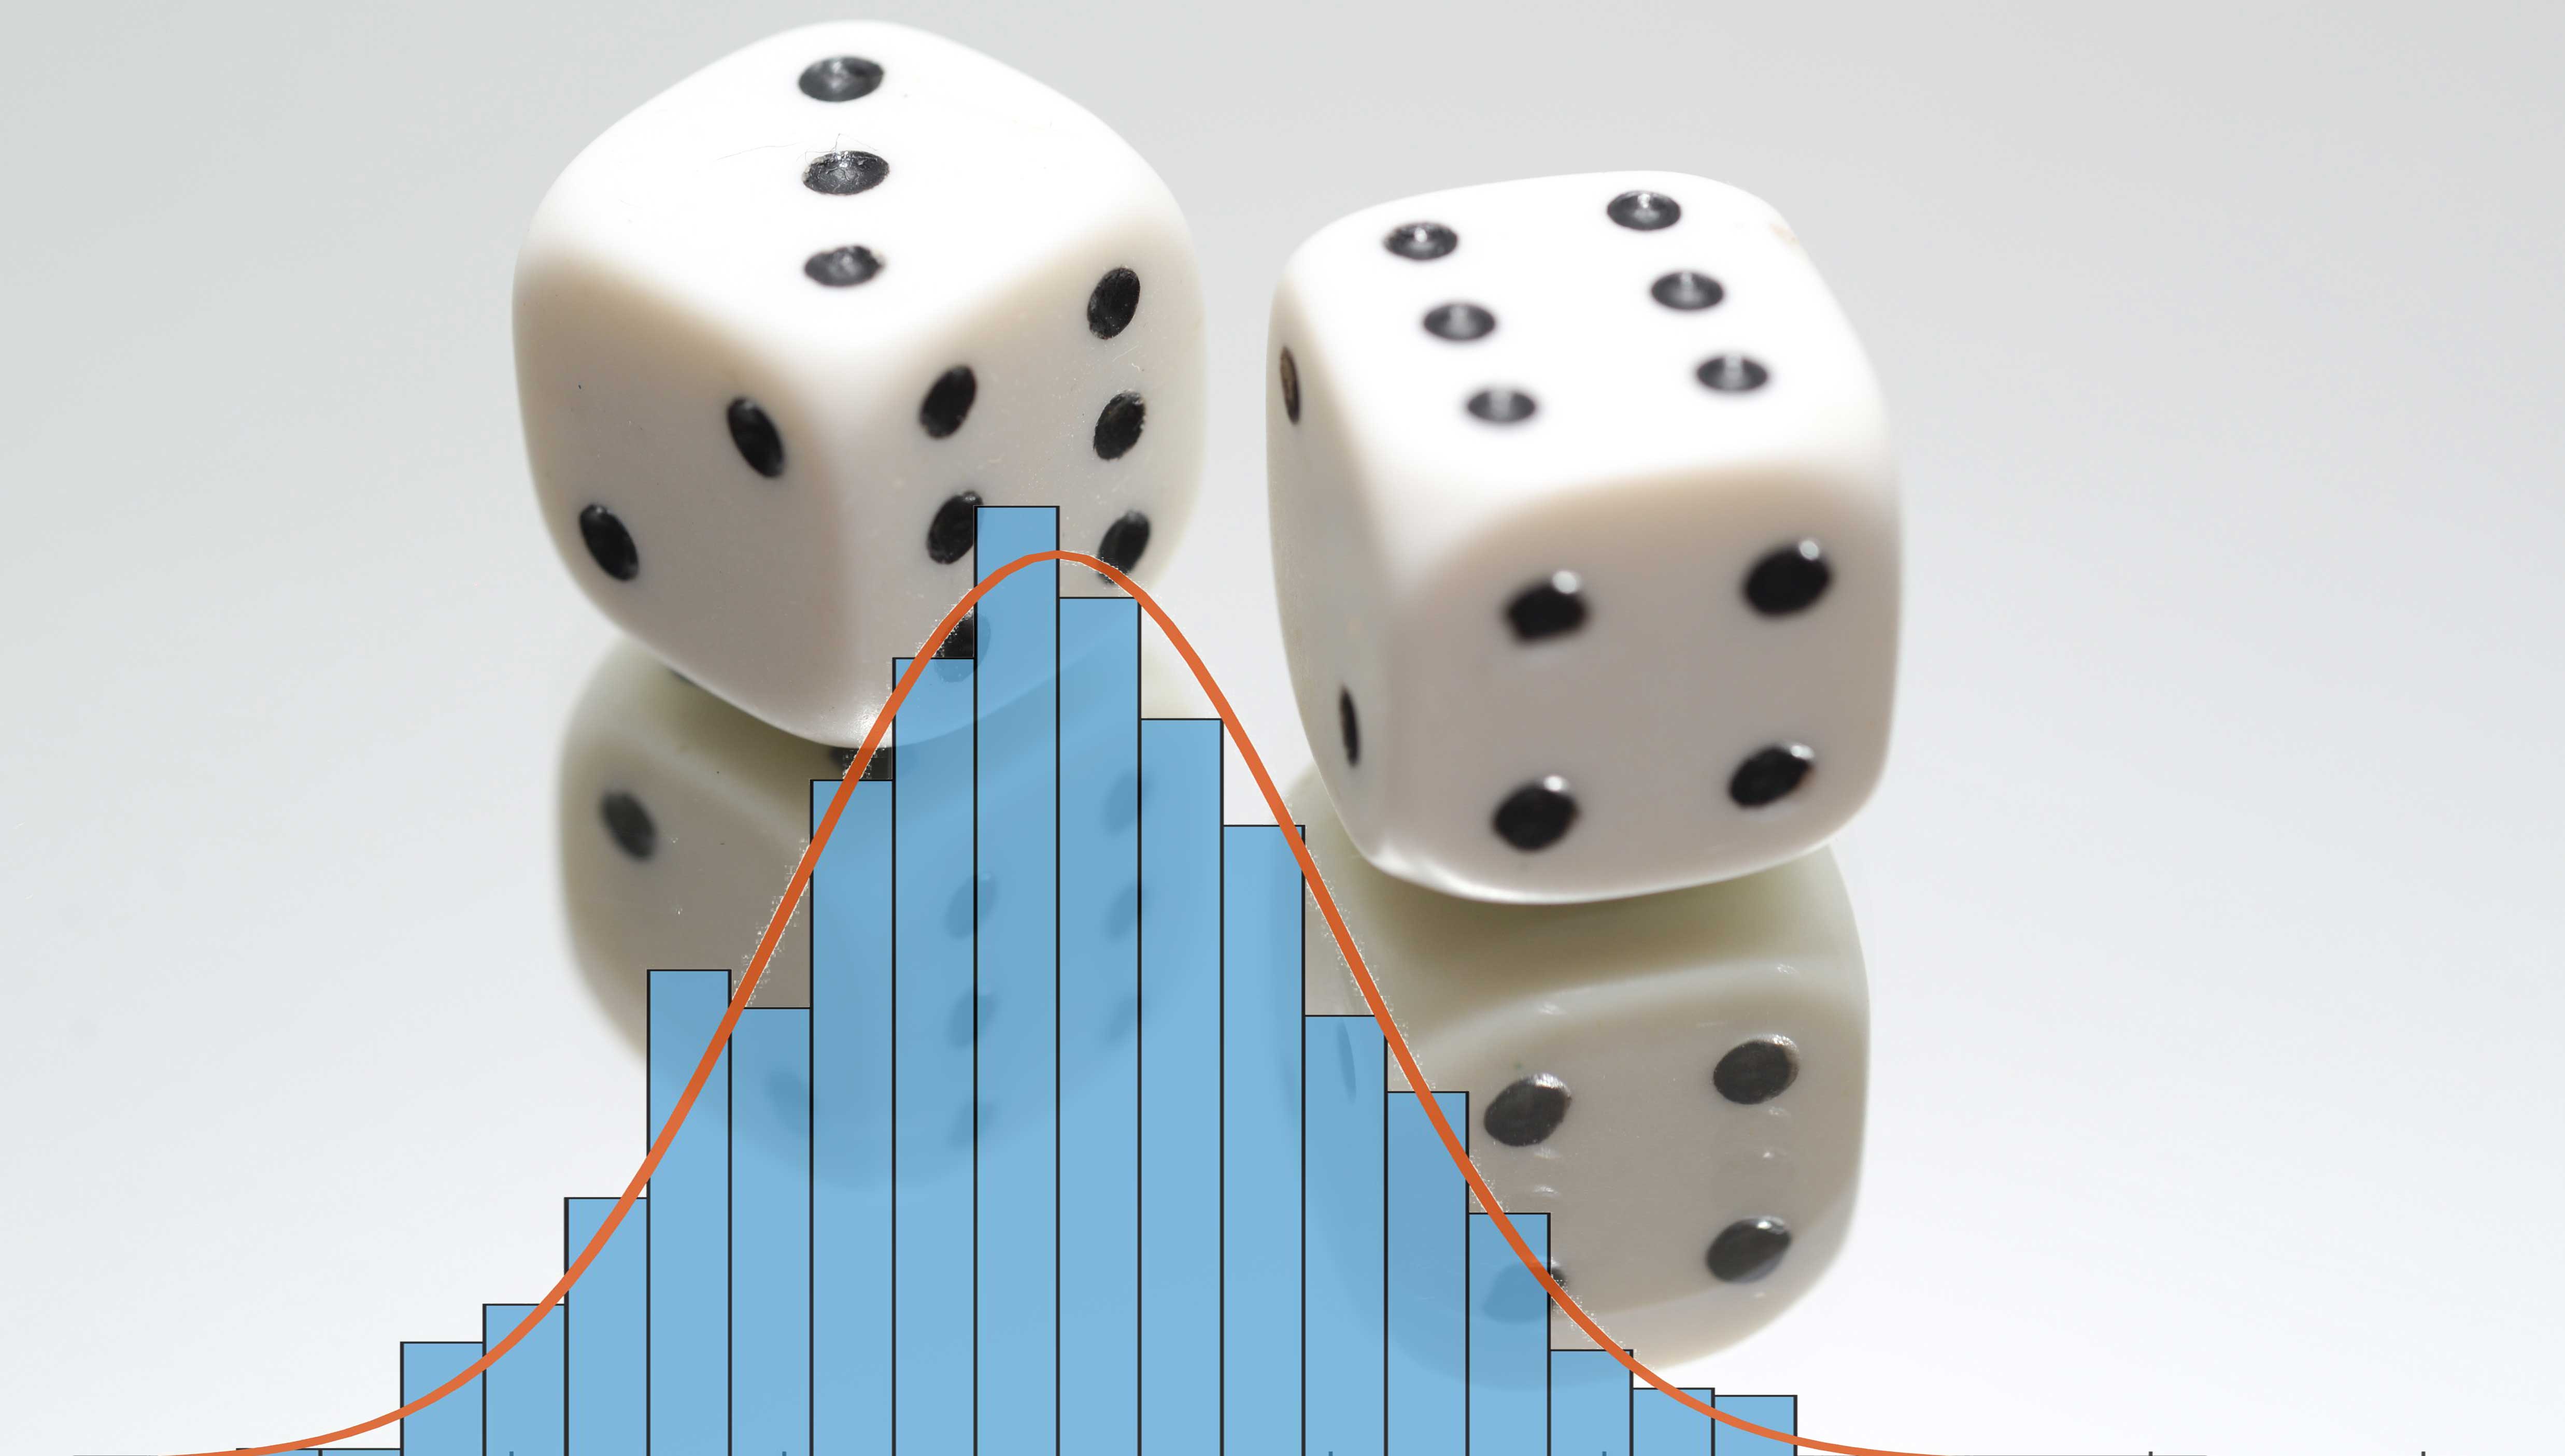 Two dice, representing random number generators, show with a normal distribution histogram